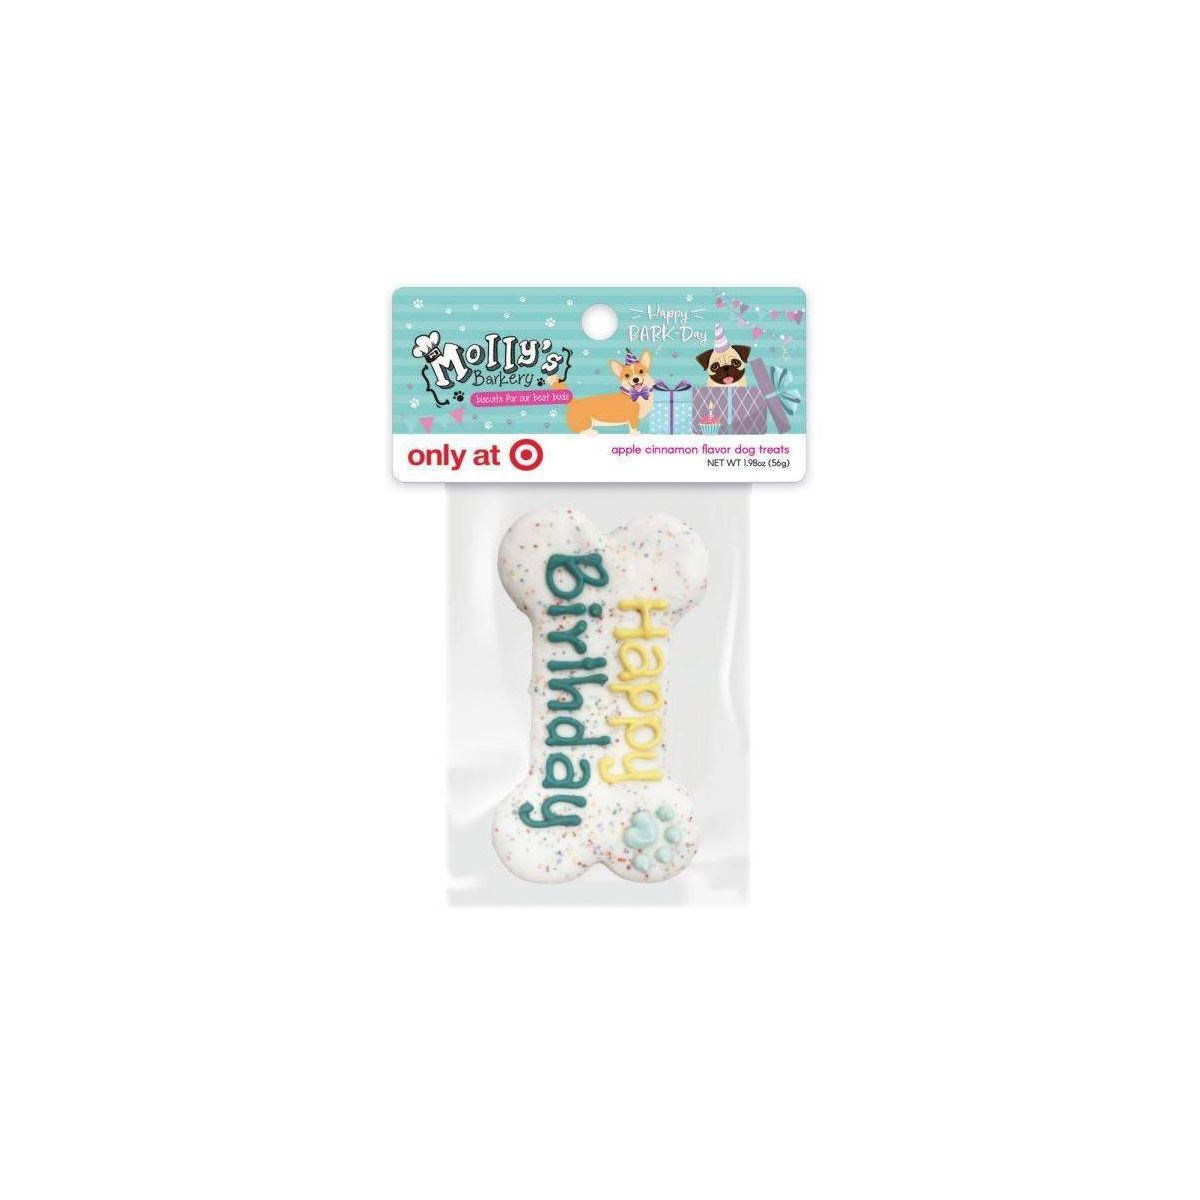 Molly's Barkery Birthday Dry Cookie with Apple and Cinnamon Flavor Dog Treats - 3.35oz | Target